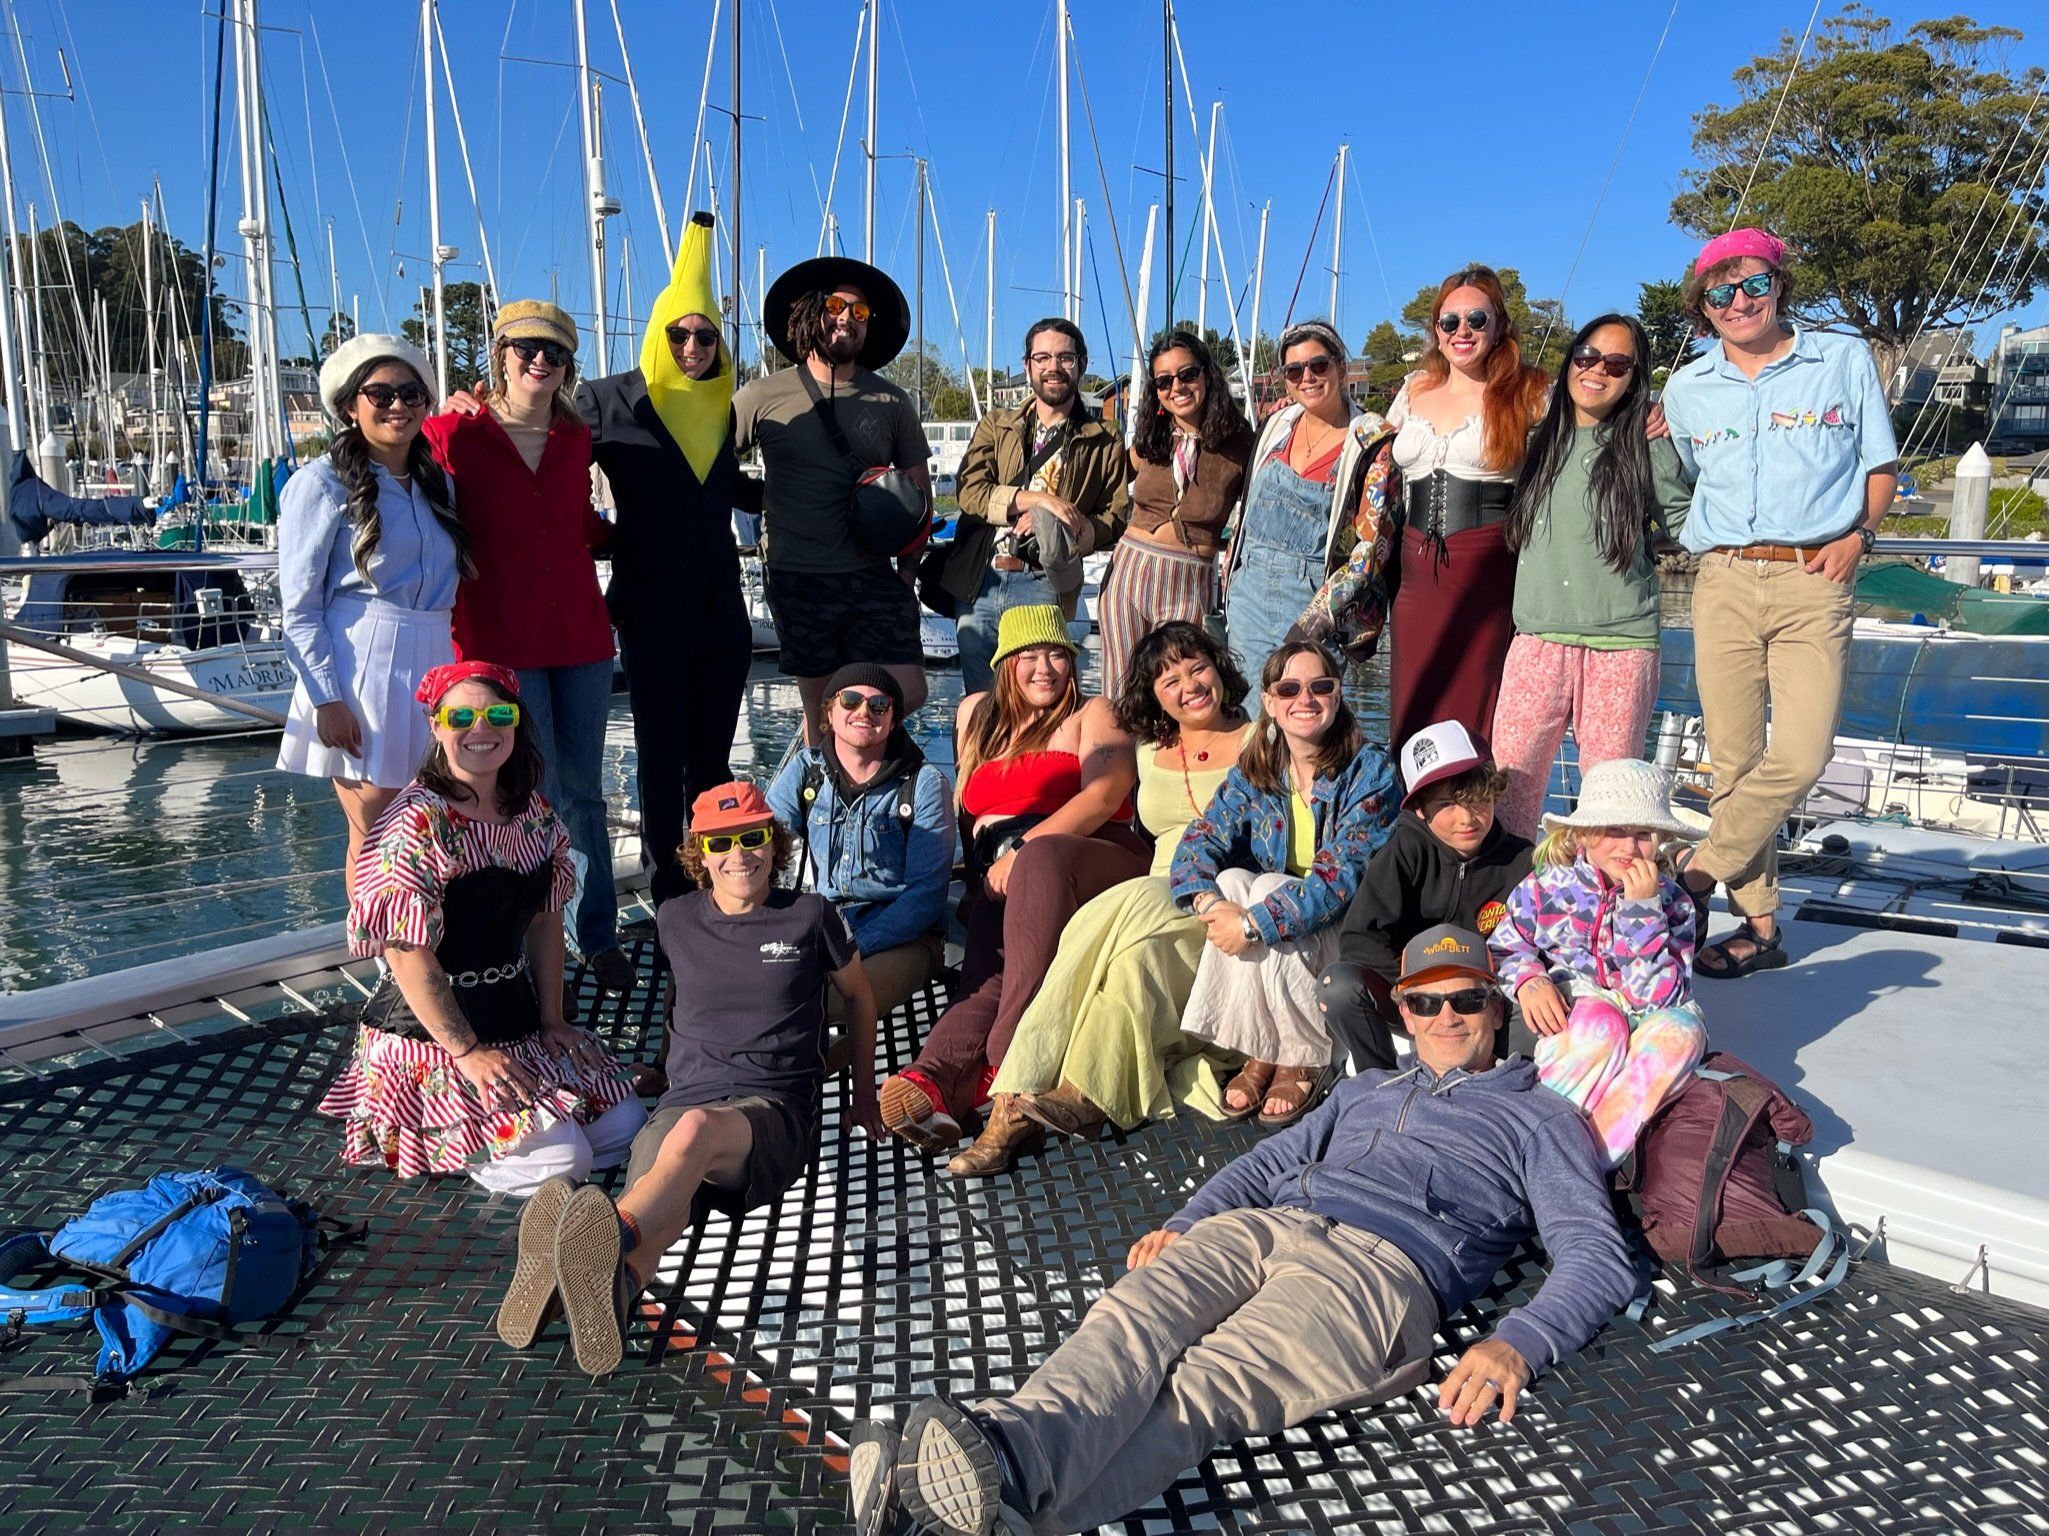 A team of coworkers gathers at the front of the boat on the net for a group photo, everyone is happy and festive wearing costumes for their fun team building private event